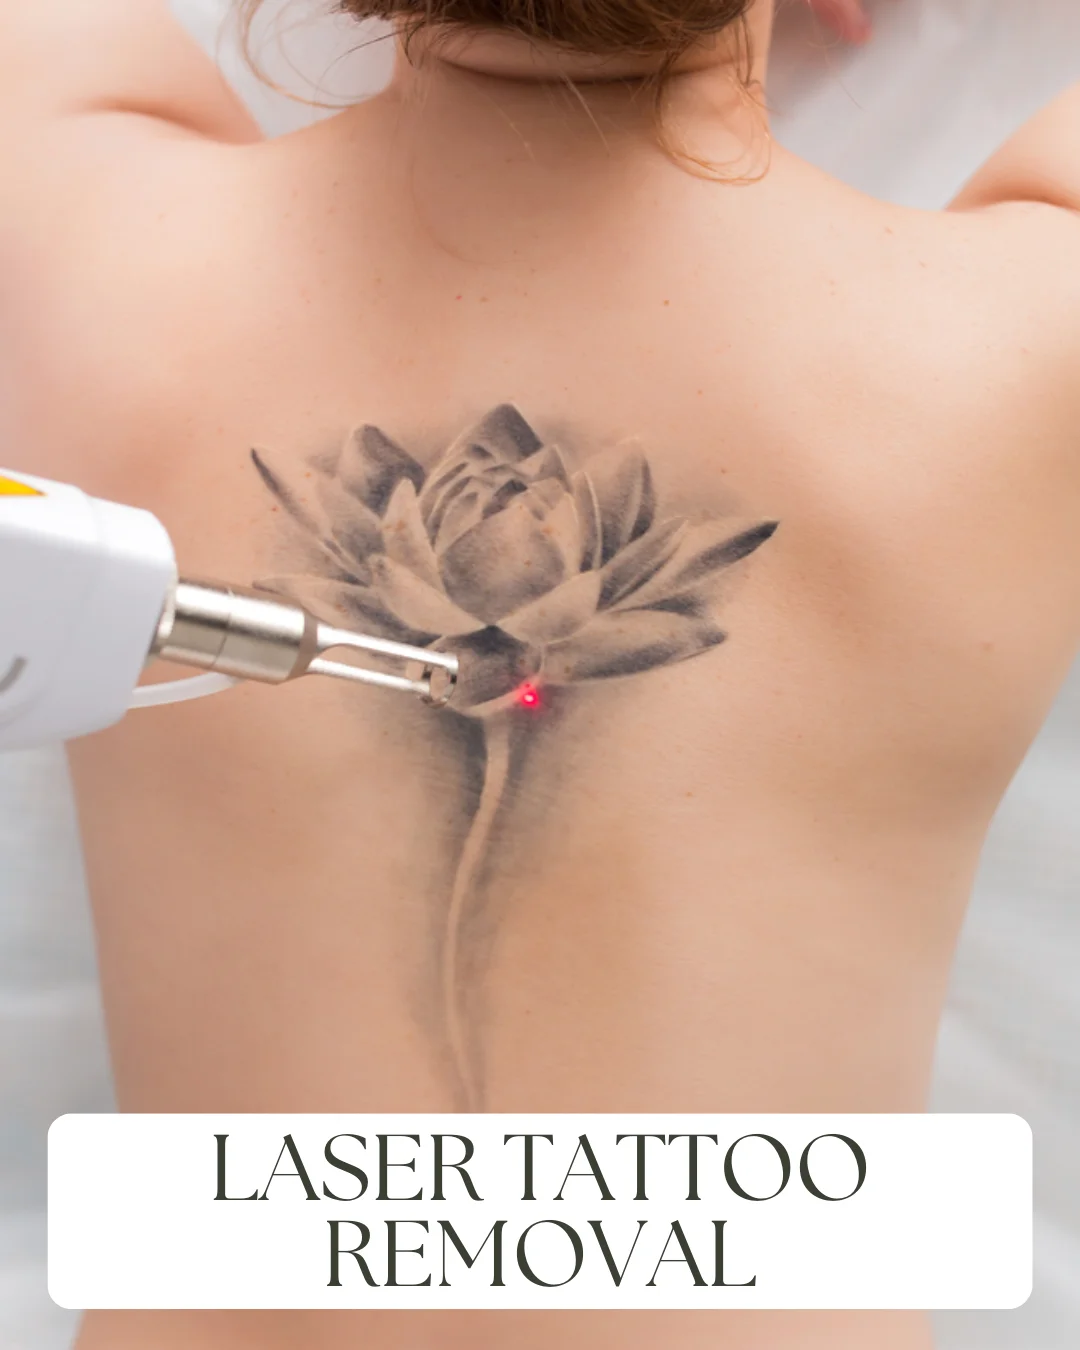 16. Laser Tattoo Removal